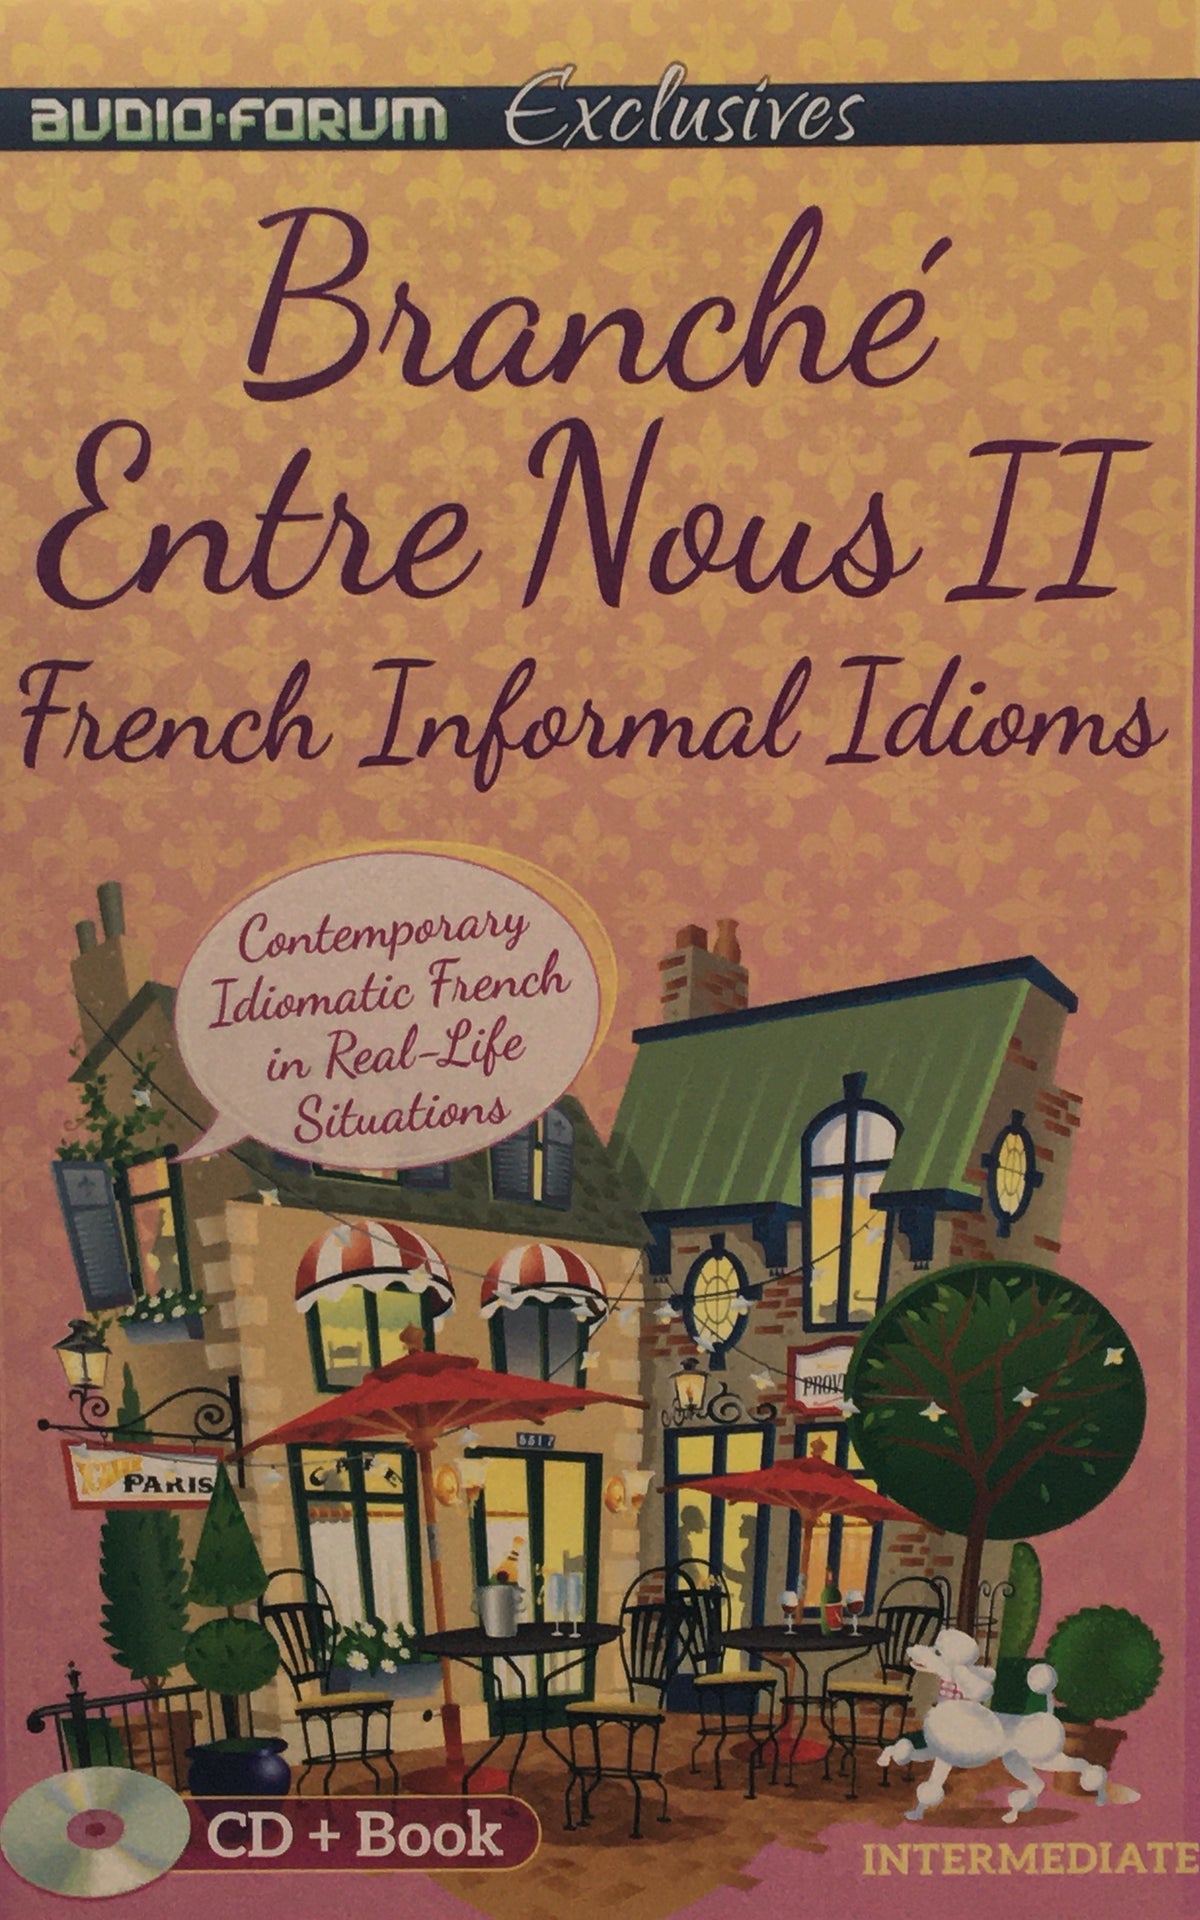 French Informal Idioms Branche Entre Nous II CD + Book Intermediate